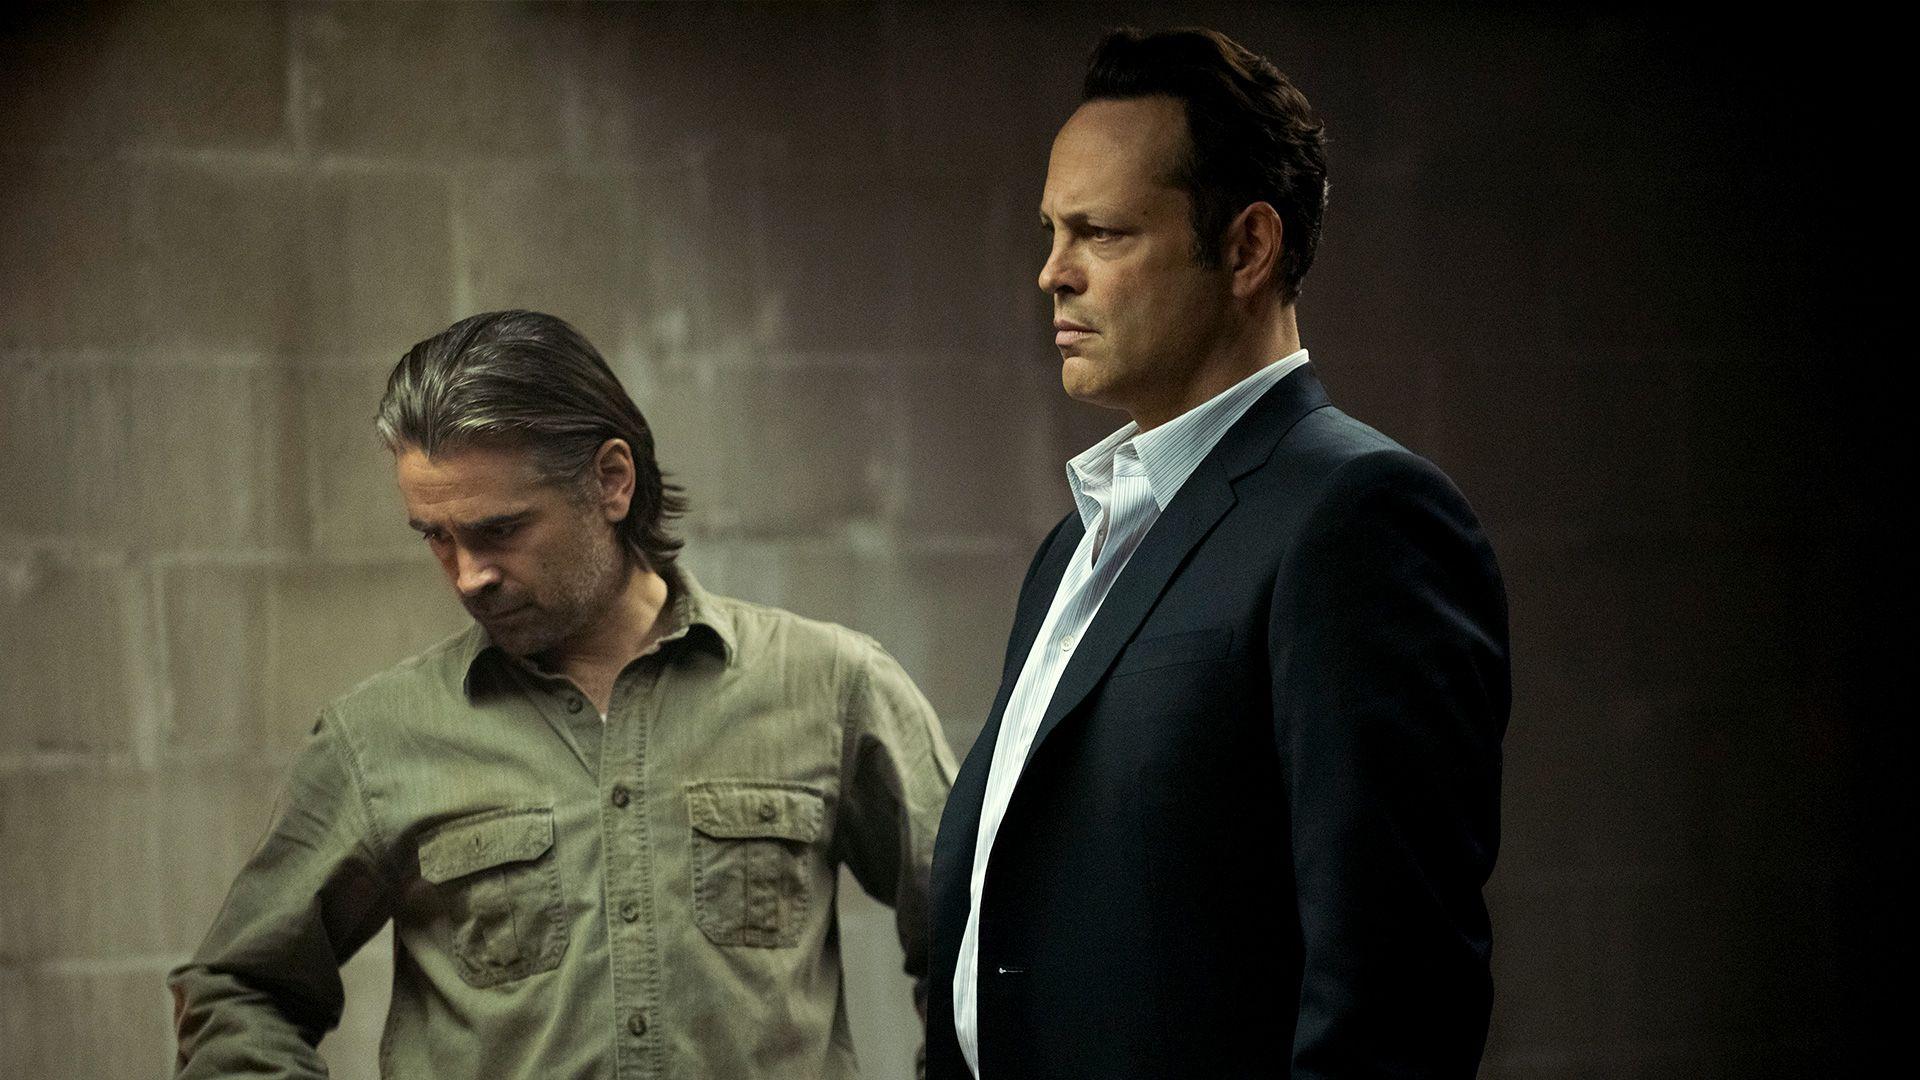 Hell Yes, 'True Detective' Is Coming Back!